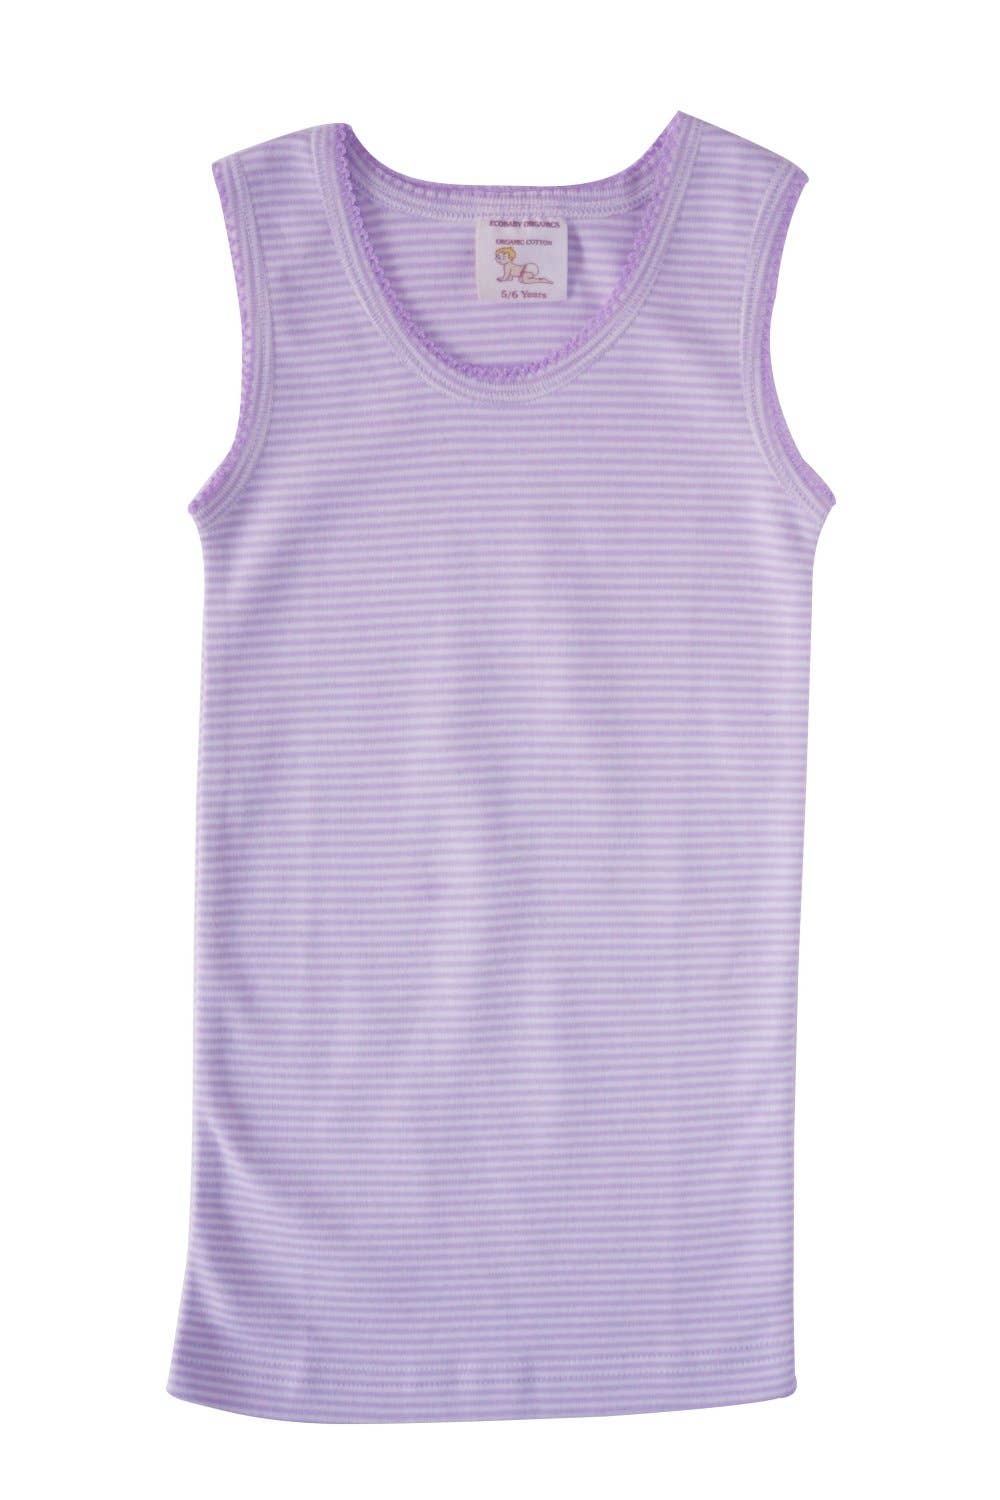 https://allthingsbeingeco.ca/cdn/shop/products/healthy-body-head-to-toe-lavender-stripe-organic-cotton-tank-top-all-things-being-eco.jpg?v=1642291487